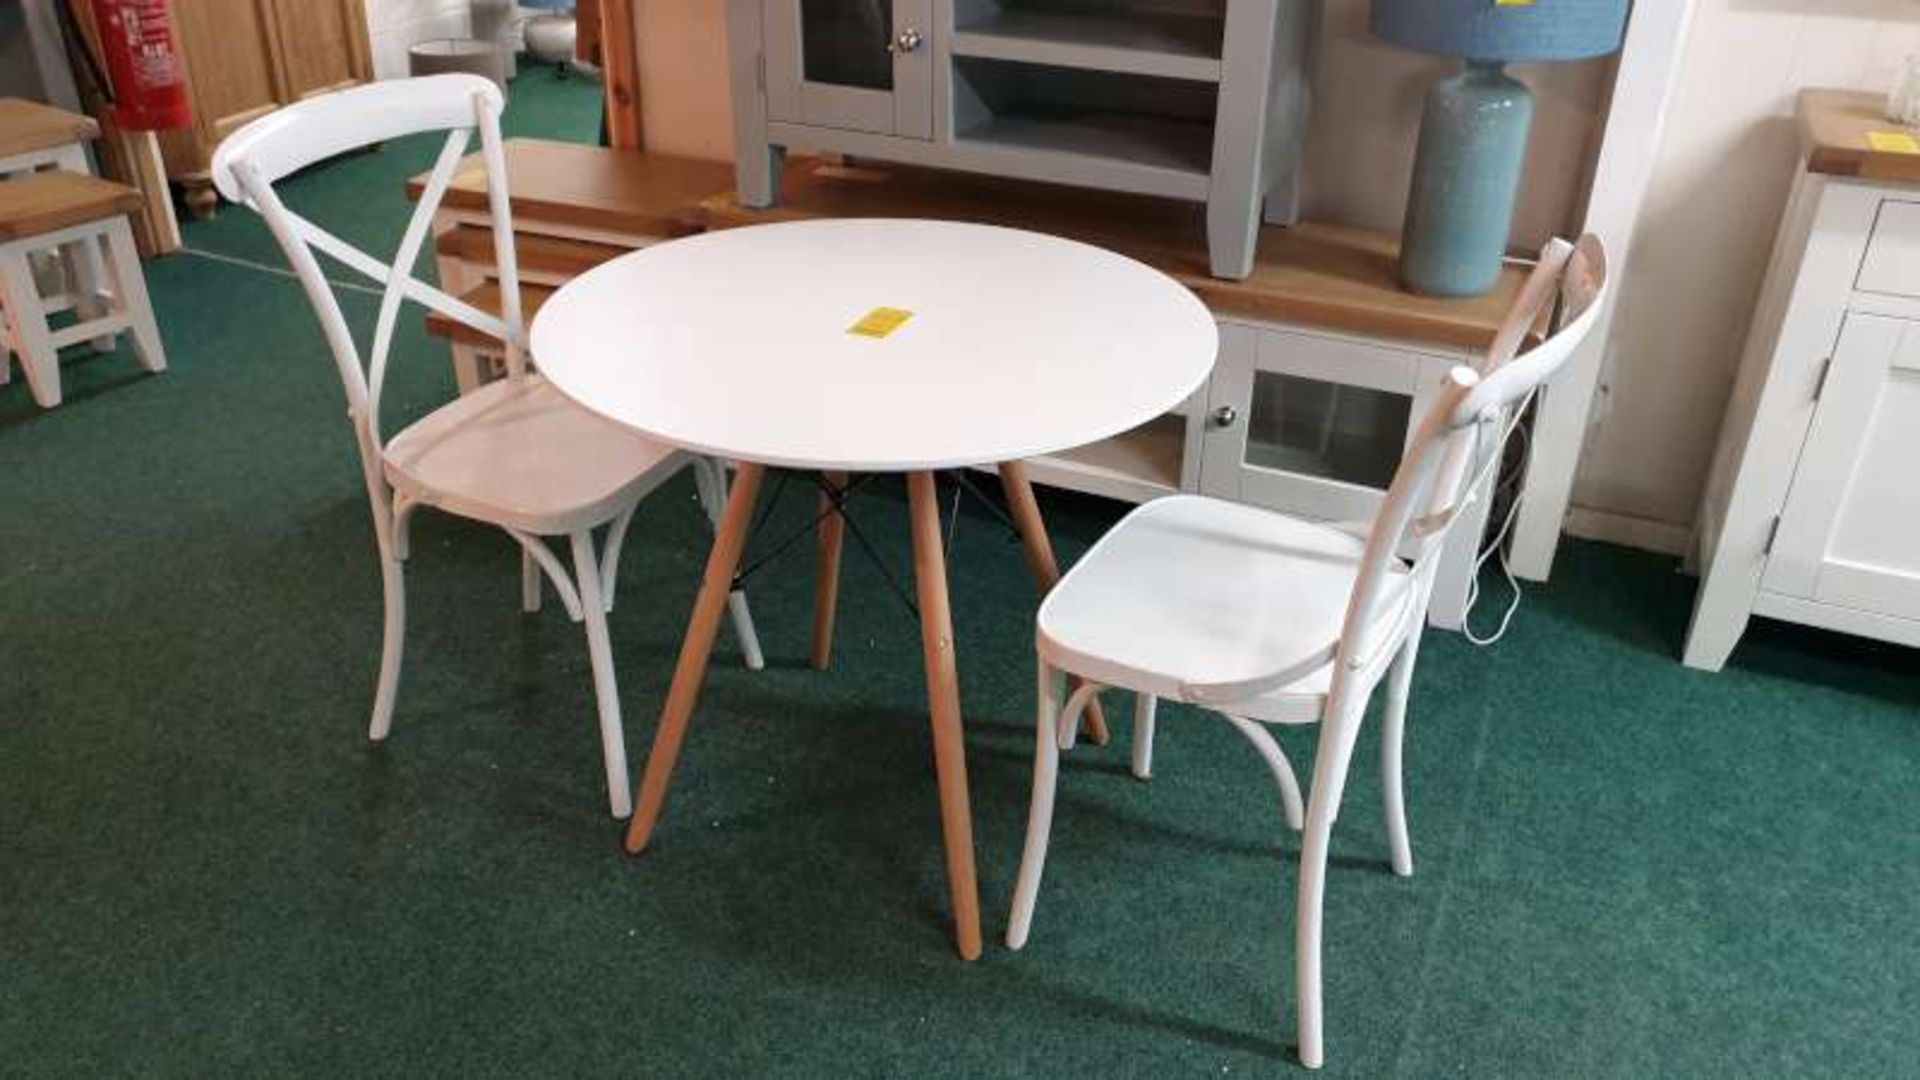 ROUND WOODEN TABLE 80CM DIA PLUS 2 METAL CHAIRS RRP £299